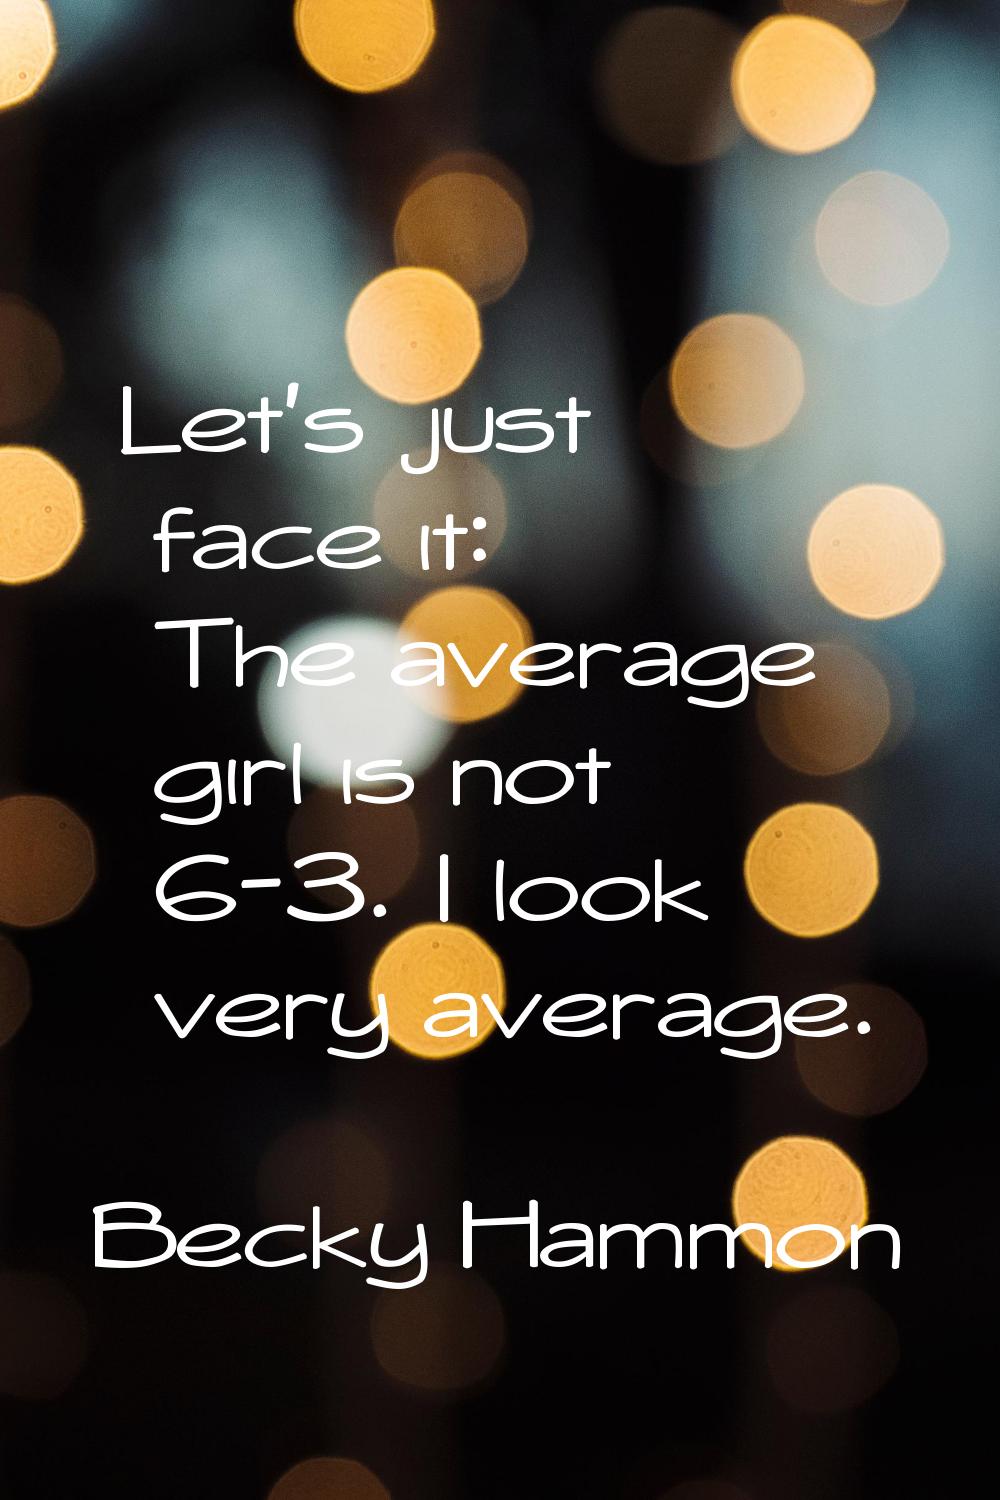 Let's just face it: The average girl is not 6-3. I look very average.